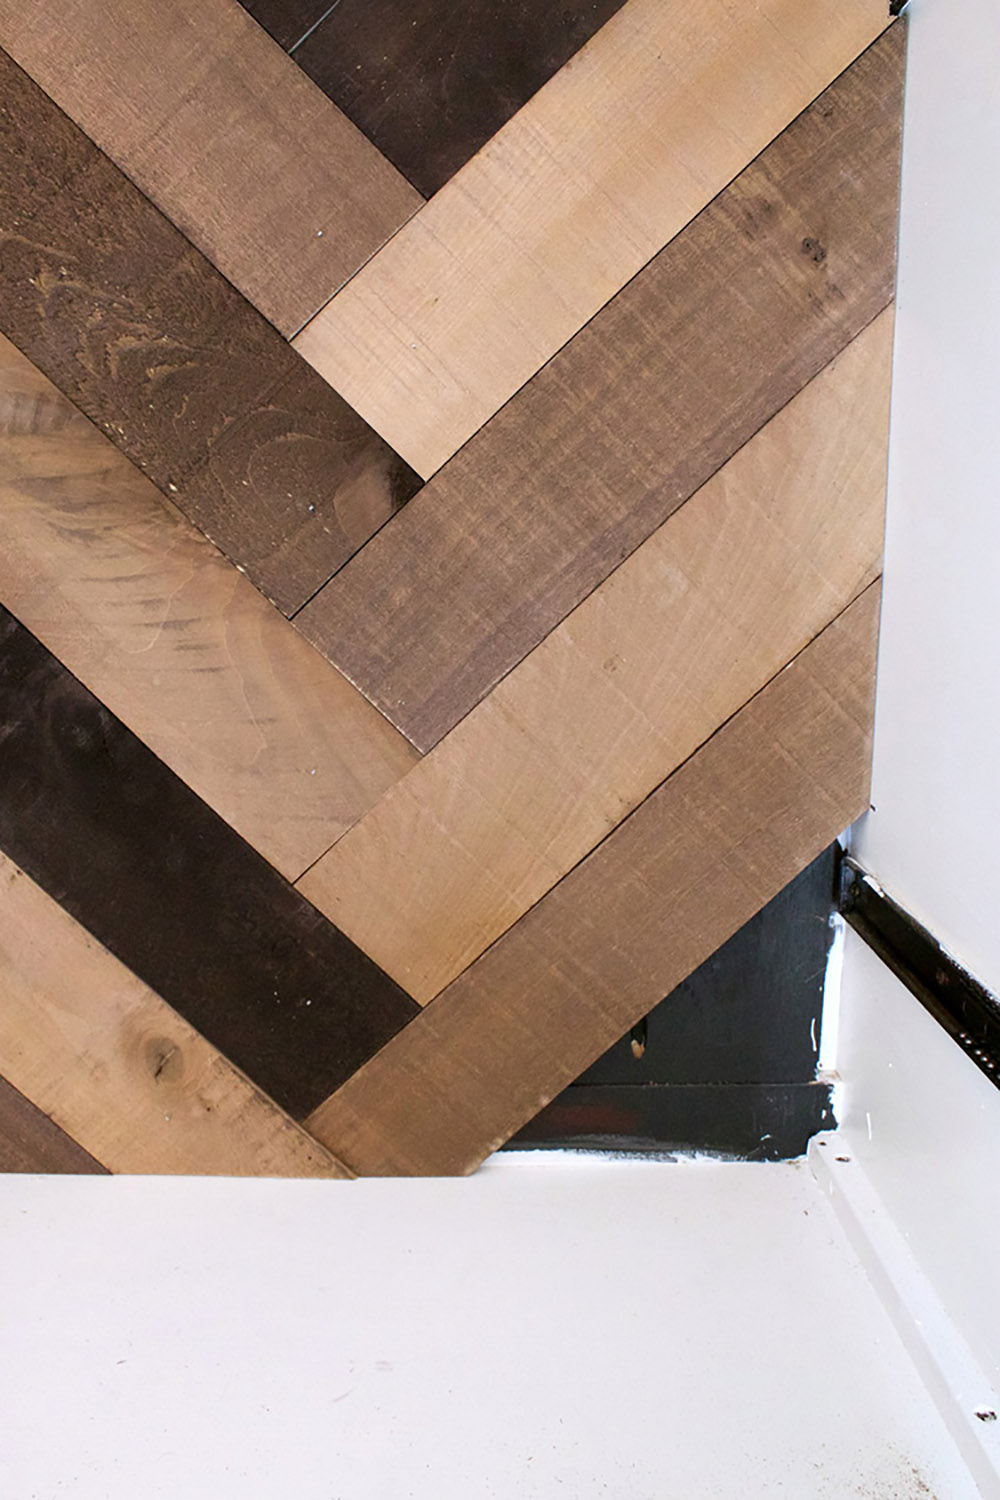 Upgrade an Old Armoire for a Weathered Wood Herringbone Look